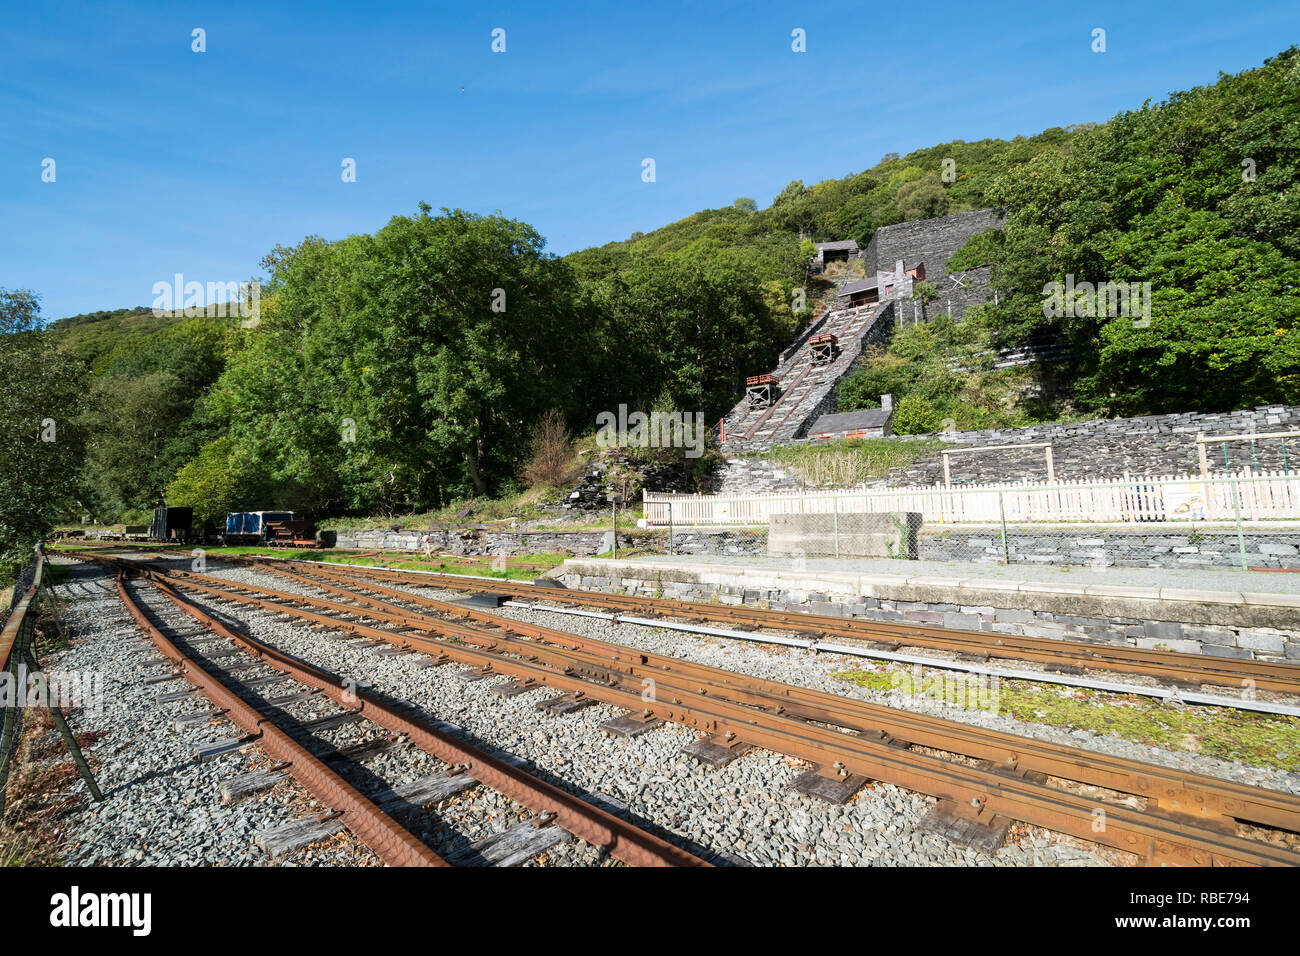 Llanberis Lake Railway next to Llyn Padarn in North Wales showing the Vivian quarry railway incline at the rear Stock Photo